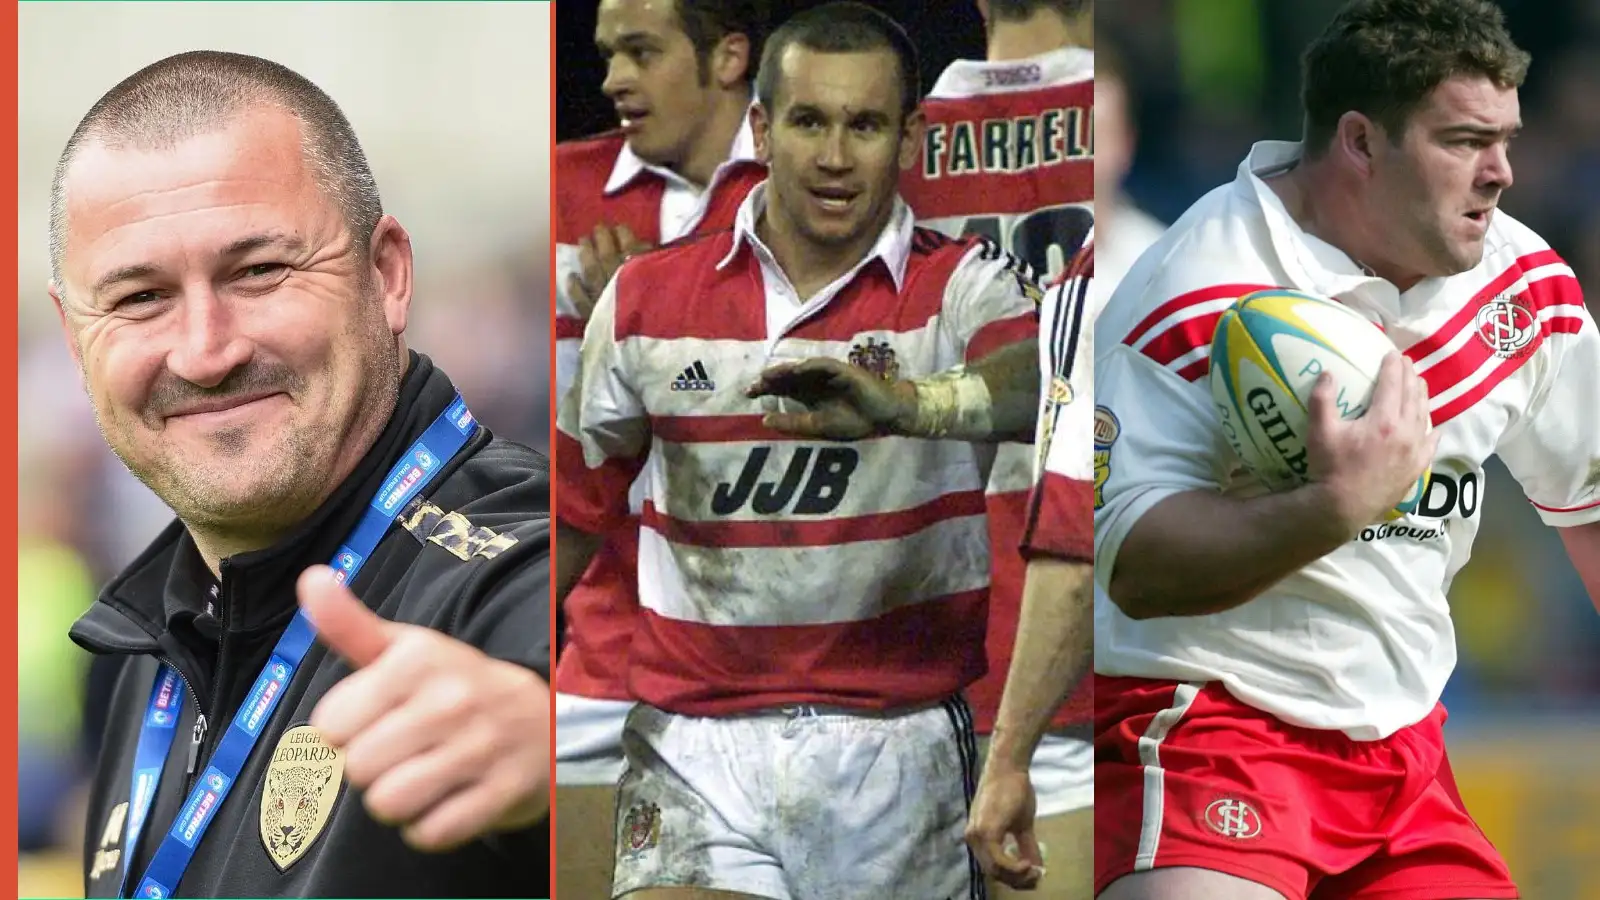 Wigan CEO Kris Radlinski shares emotional family journey and St Helens  rivalry ahead of Good Friday | Love Rugby League